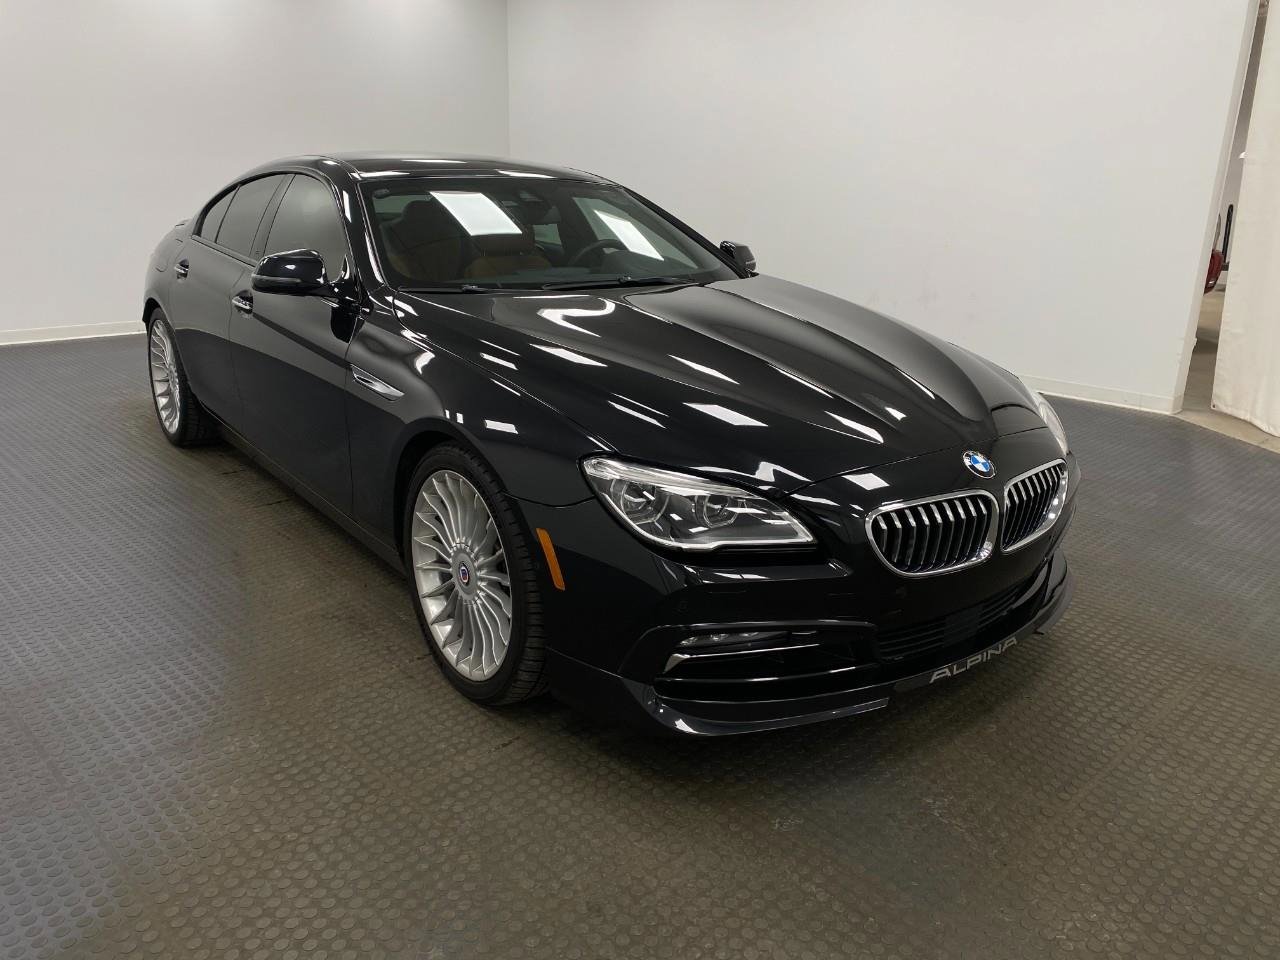 Used 2018 BMW ALPINA B6 xDrive Gran Coupe for Sale (Test Drive at Home) -  Kelley Blue Book